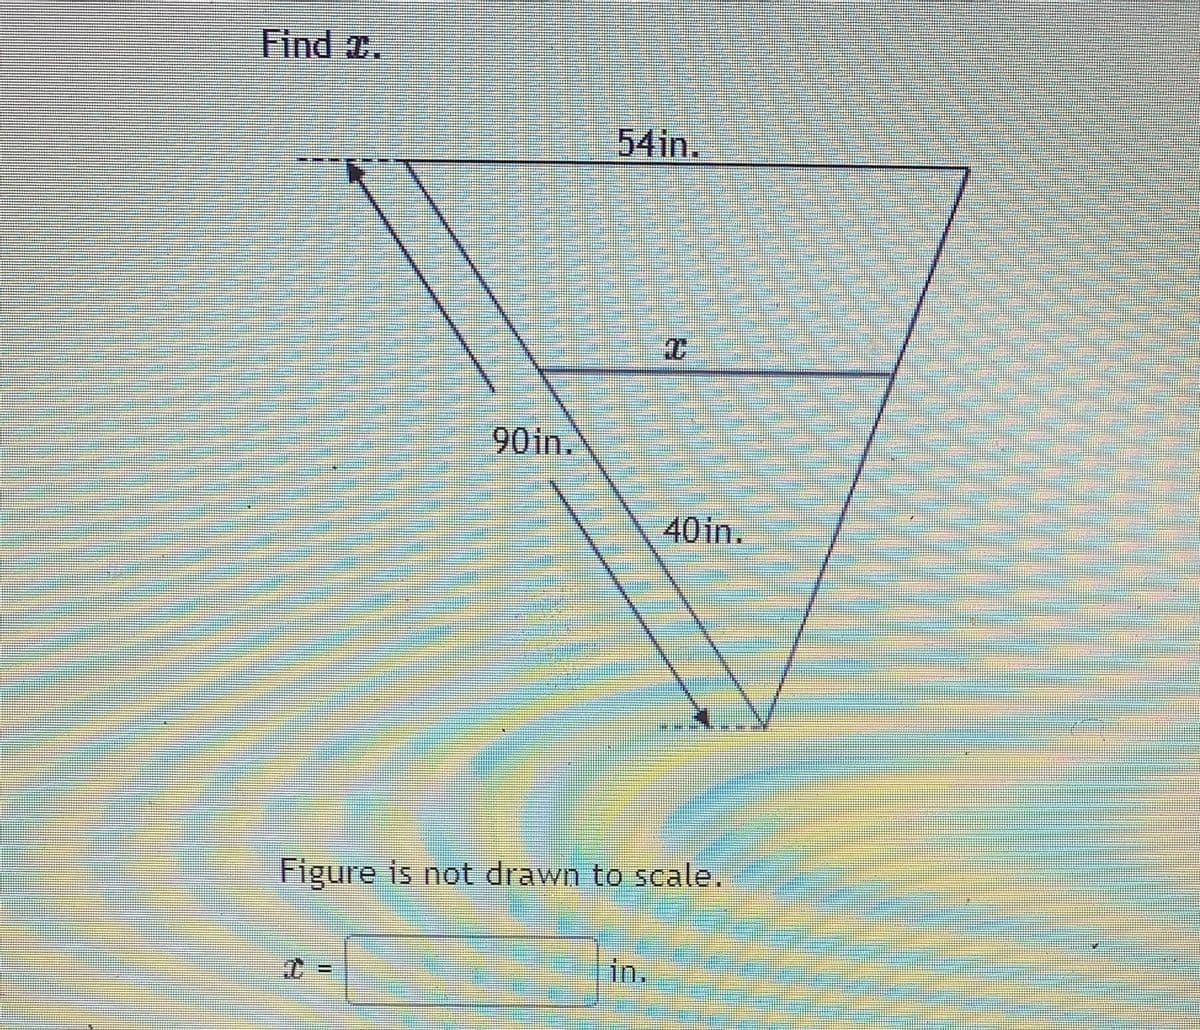 Find .
54in.
90in.
40 in.
Figure is not drawn to scale.
in.
